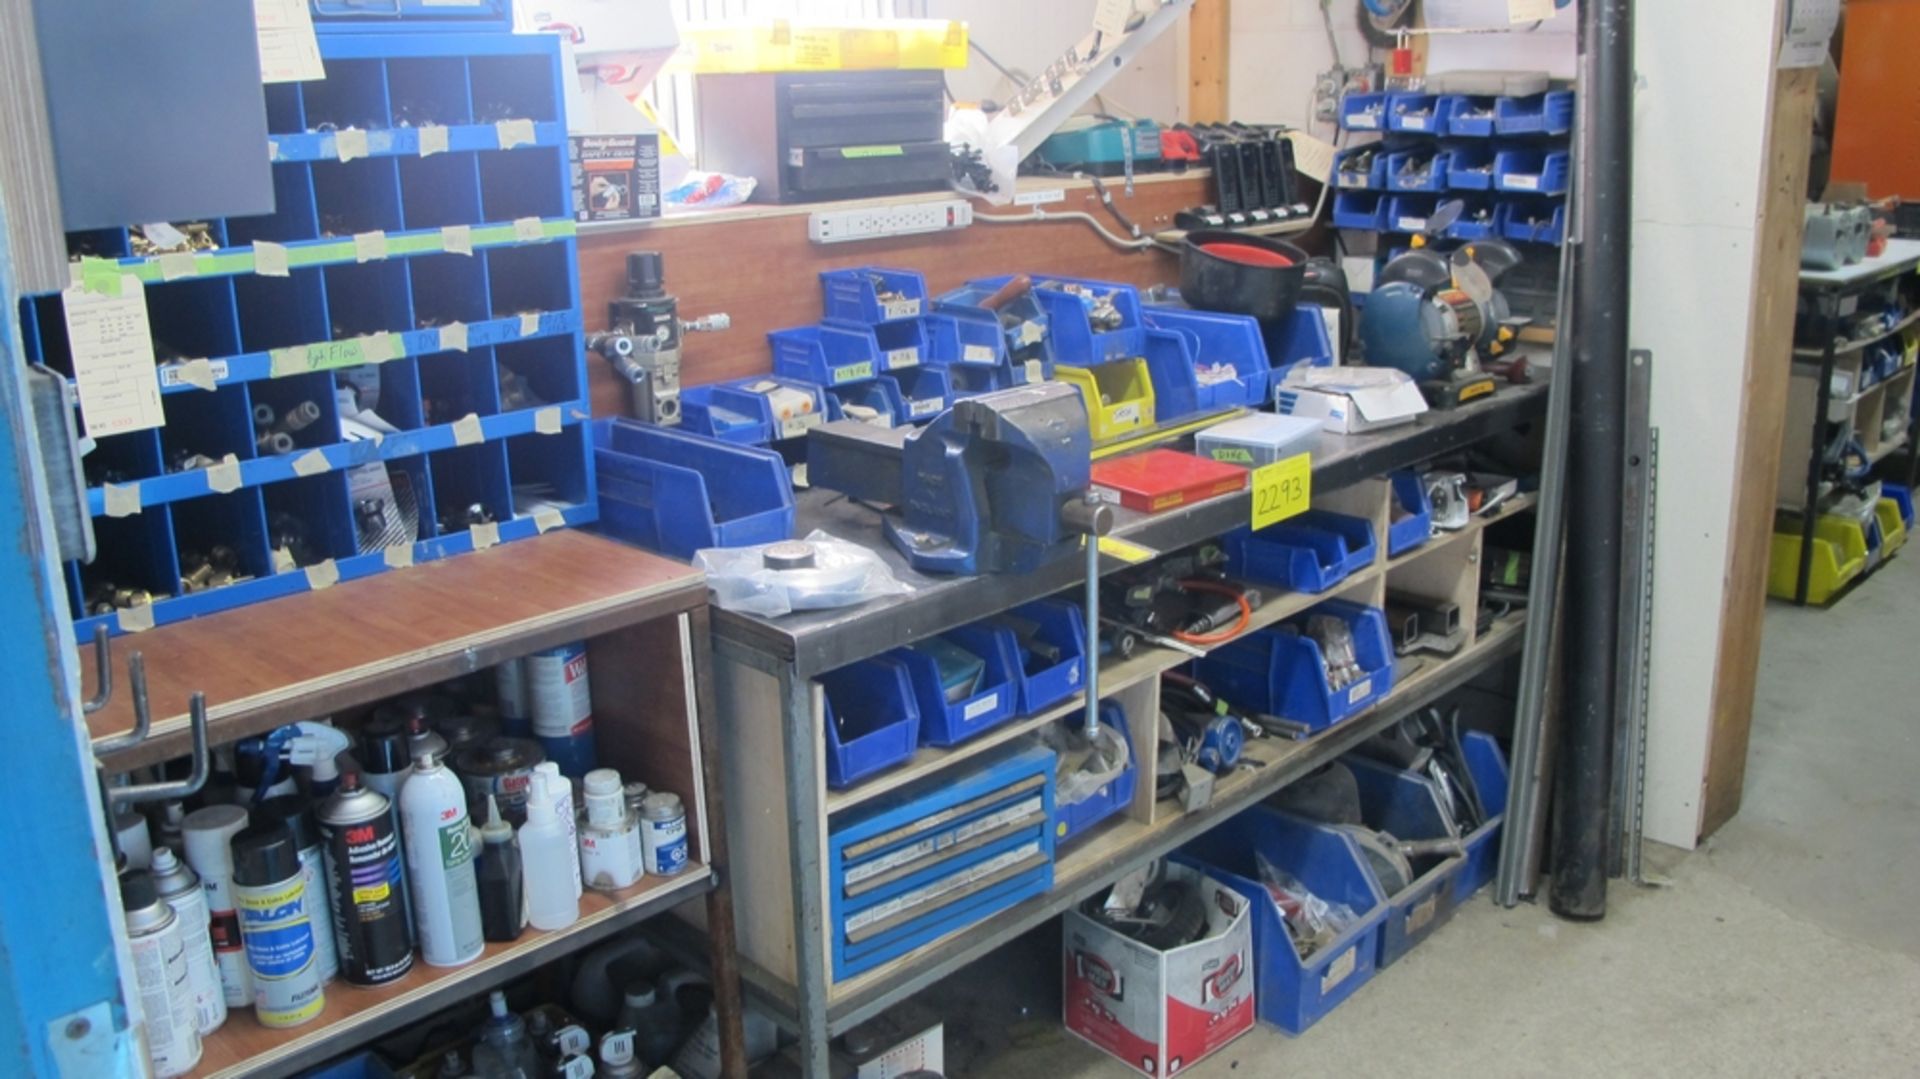 LOT OF CONTENTS OF MAINTENANCE INCLUDING BENCH W/GRINDER/VISE, BRASS FITTINGS, CABINETS, HEATER